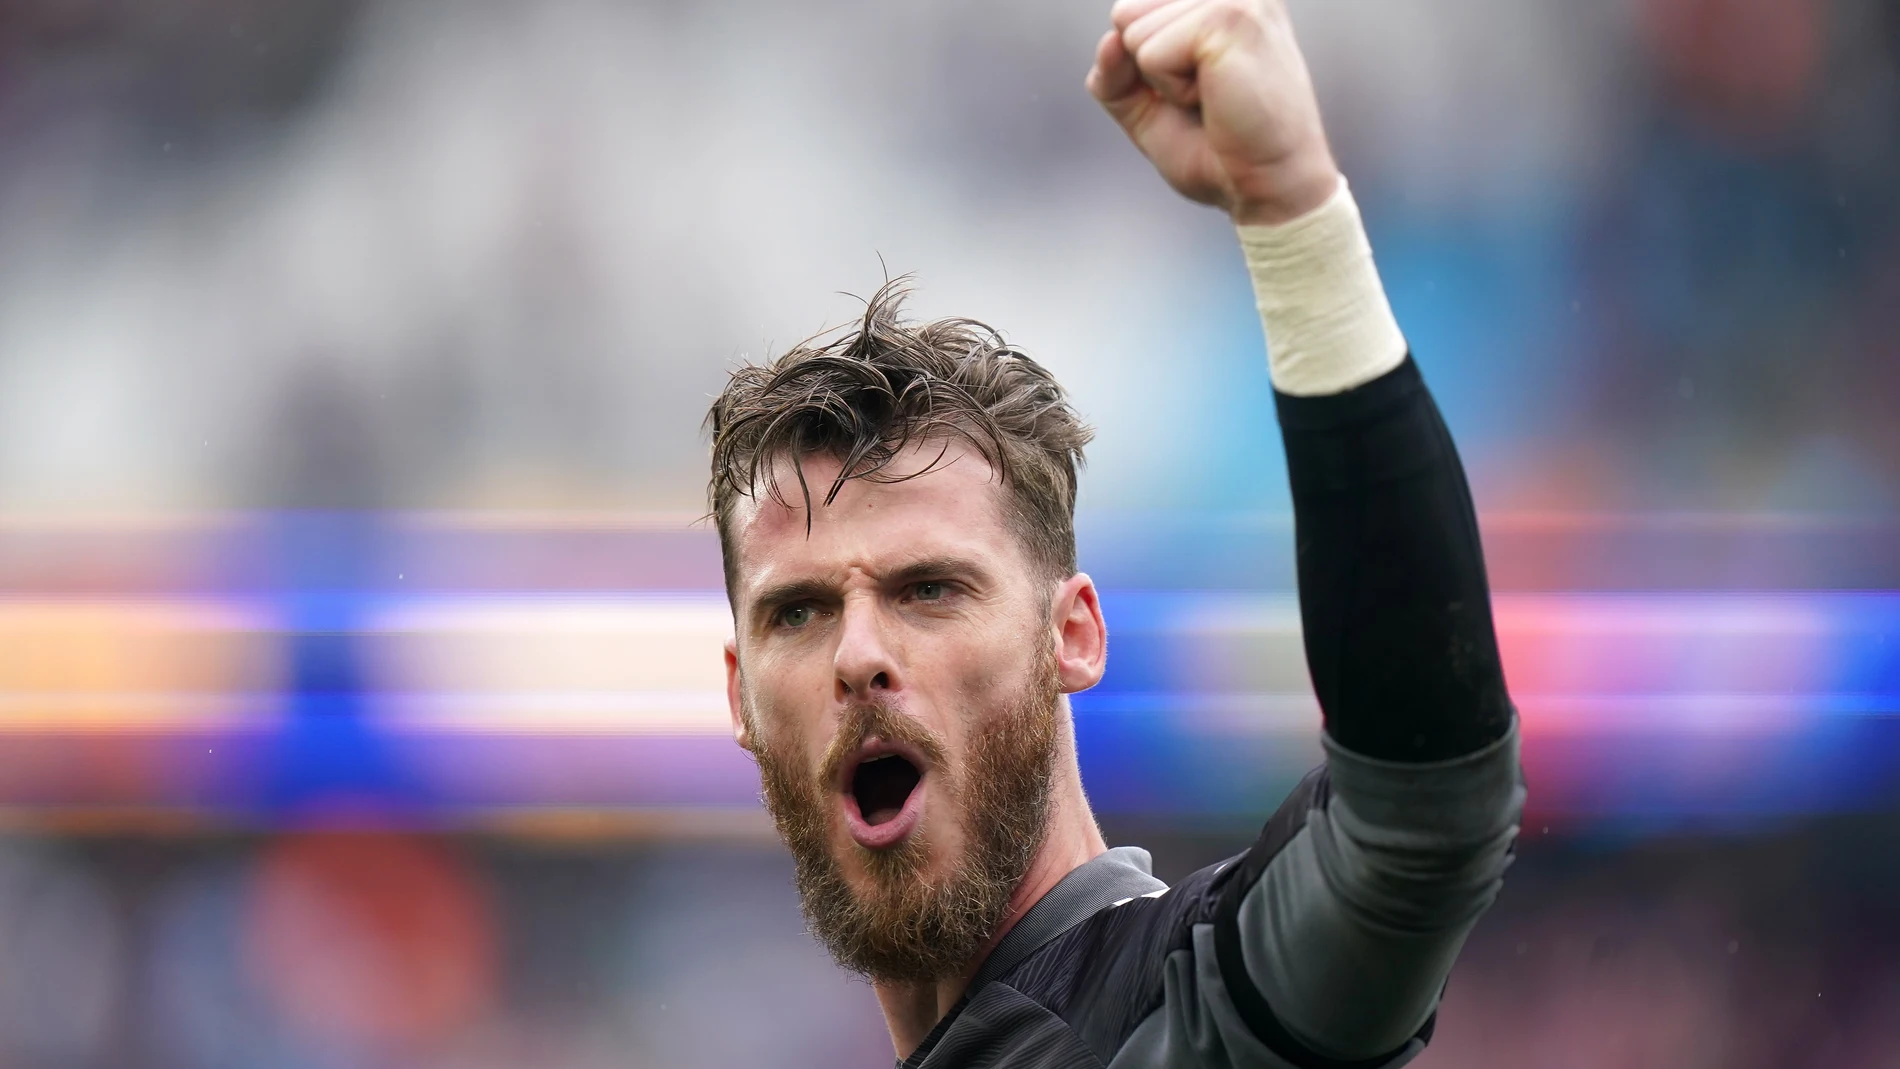 FILED - 19 September 2021, United Kingdom, London: Manchester United goalkeeper David De Gea reacts during the English Premier League soccer match between West Ham United and Manchester United. De Gea is leaving Manchester United, according to his statement on Saturday. Photo: Mike Egerton/PA Wire/dpa (Foto de ARCHIVO) 19/09/2021 ONLY FOR USE IN SPAIN